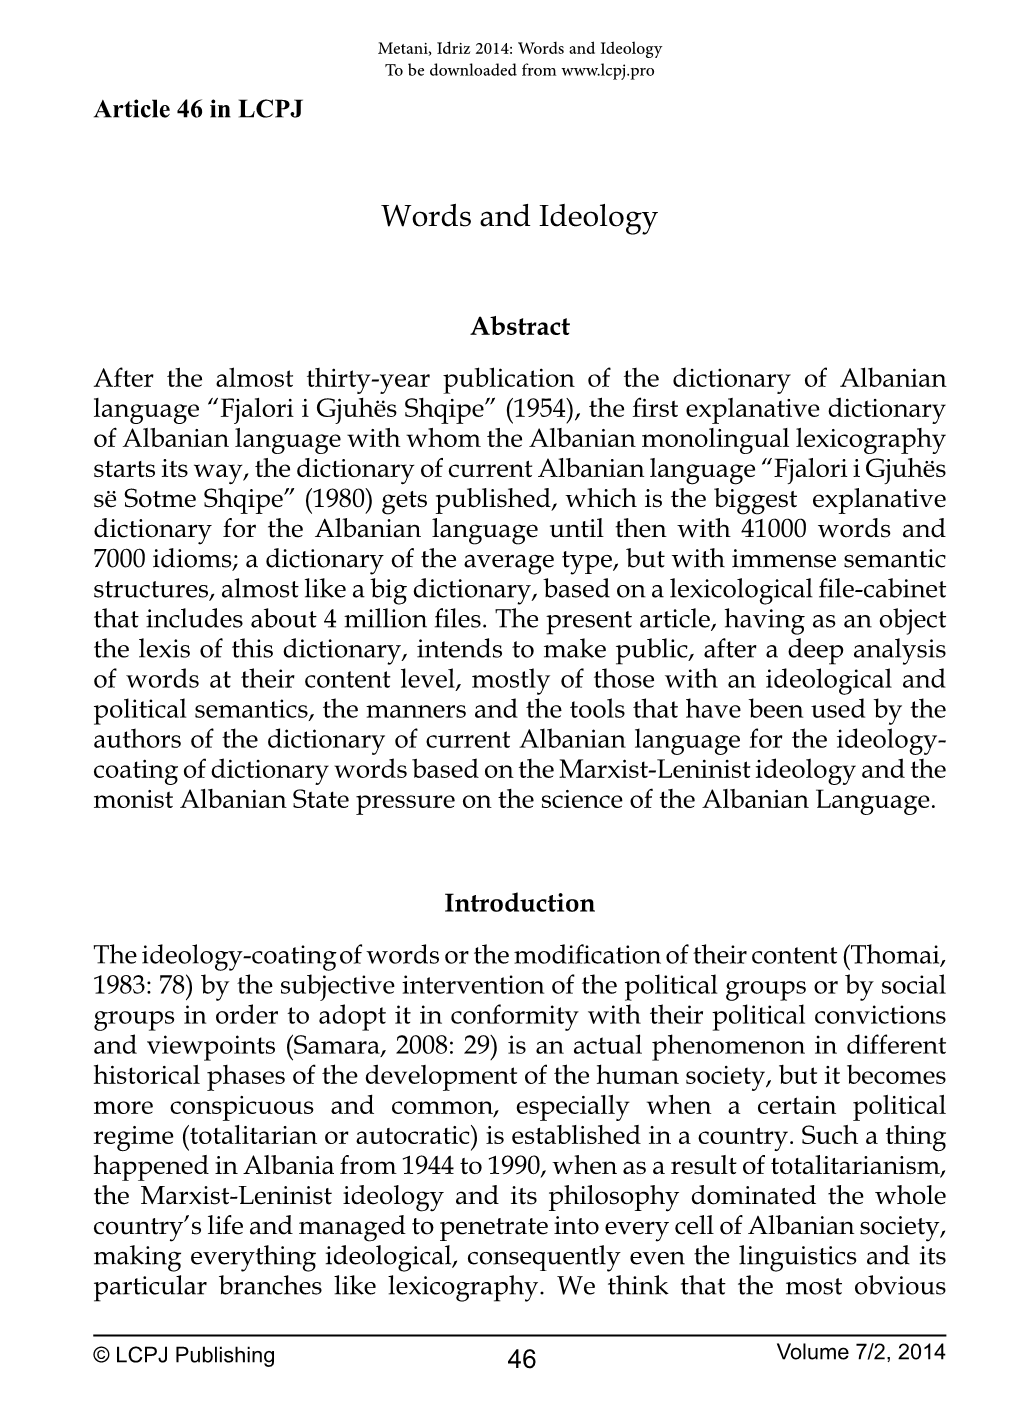 Words and Ideology to Be Downloaded from Article 46 in LCPJ